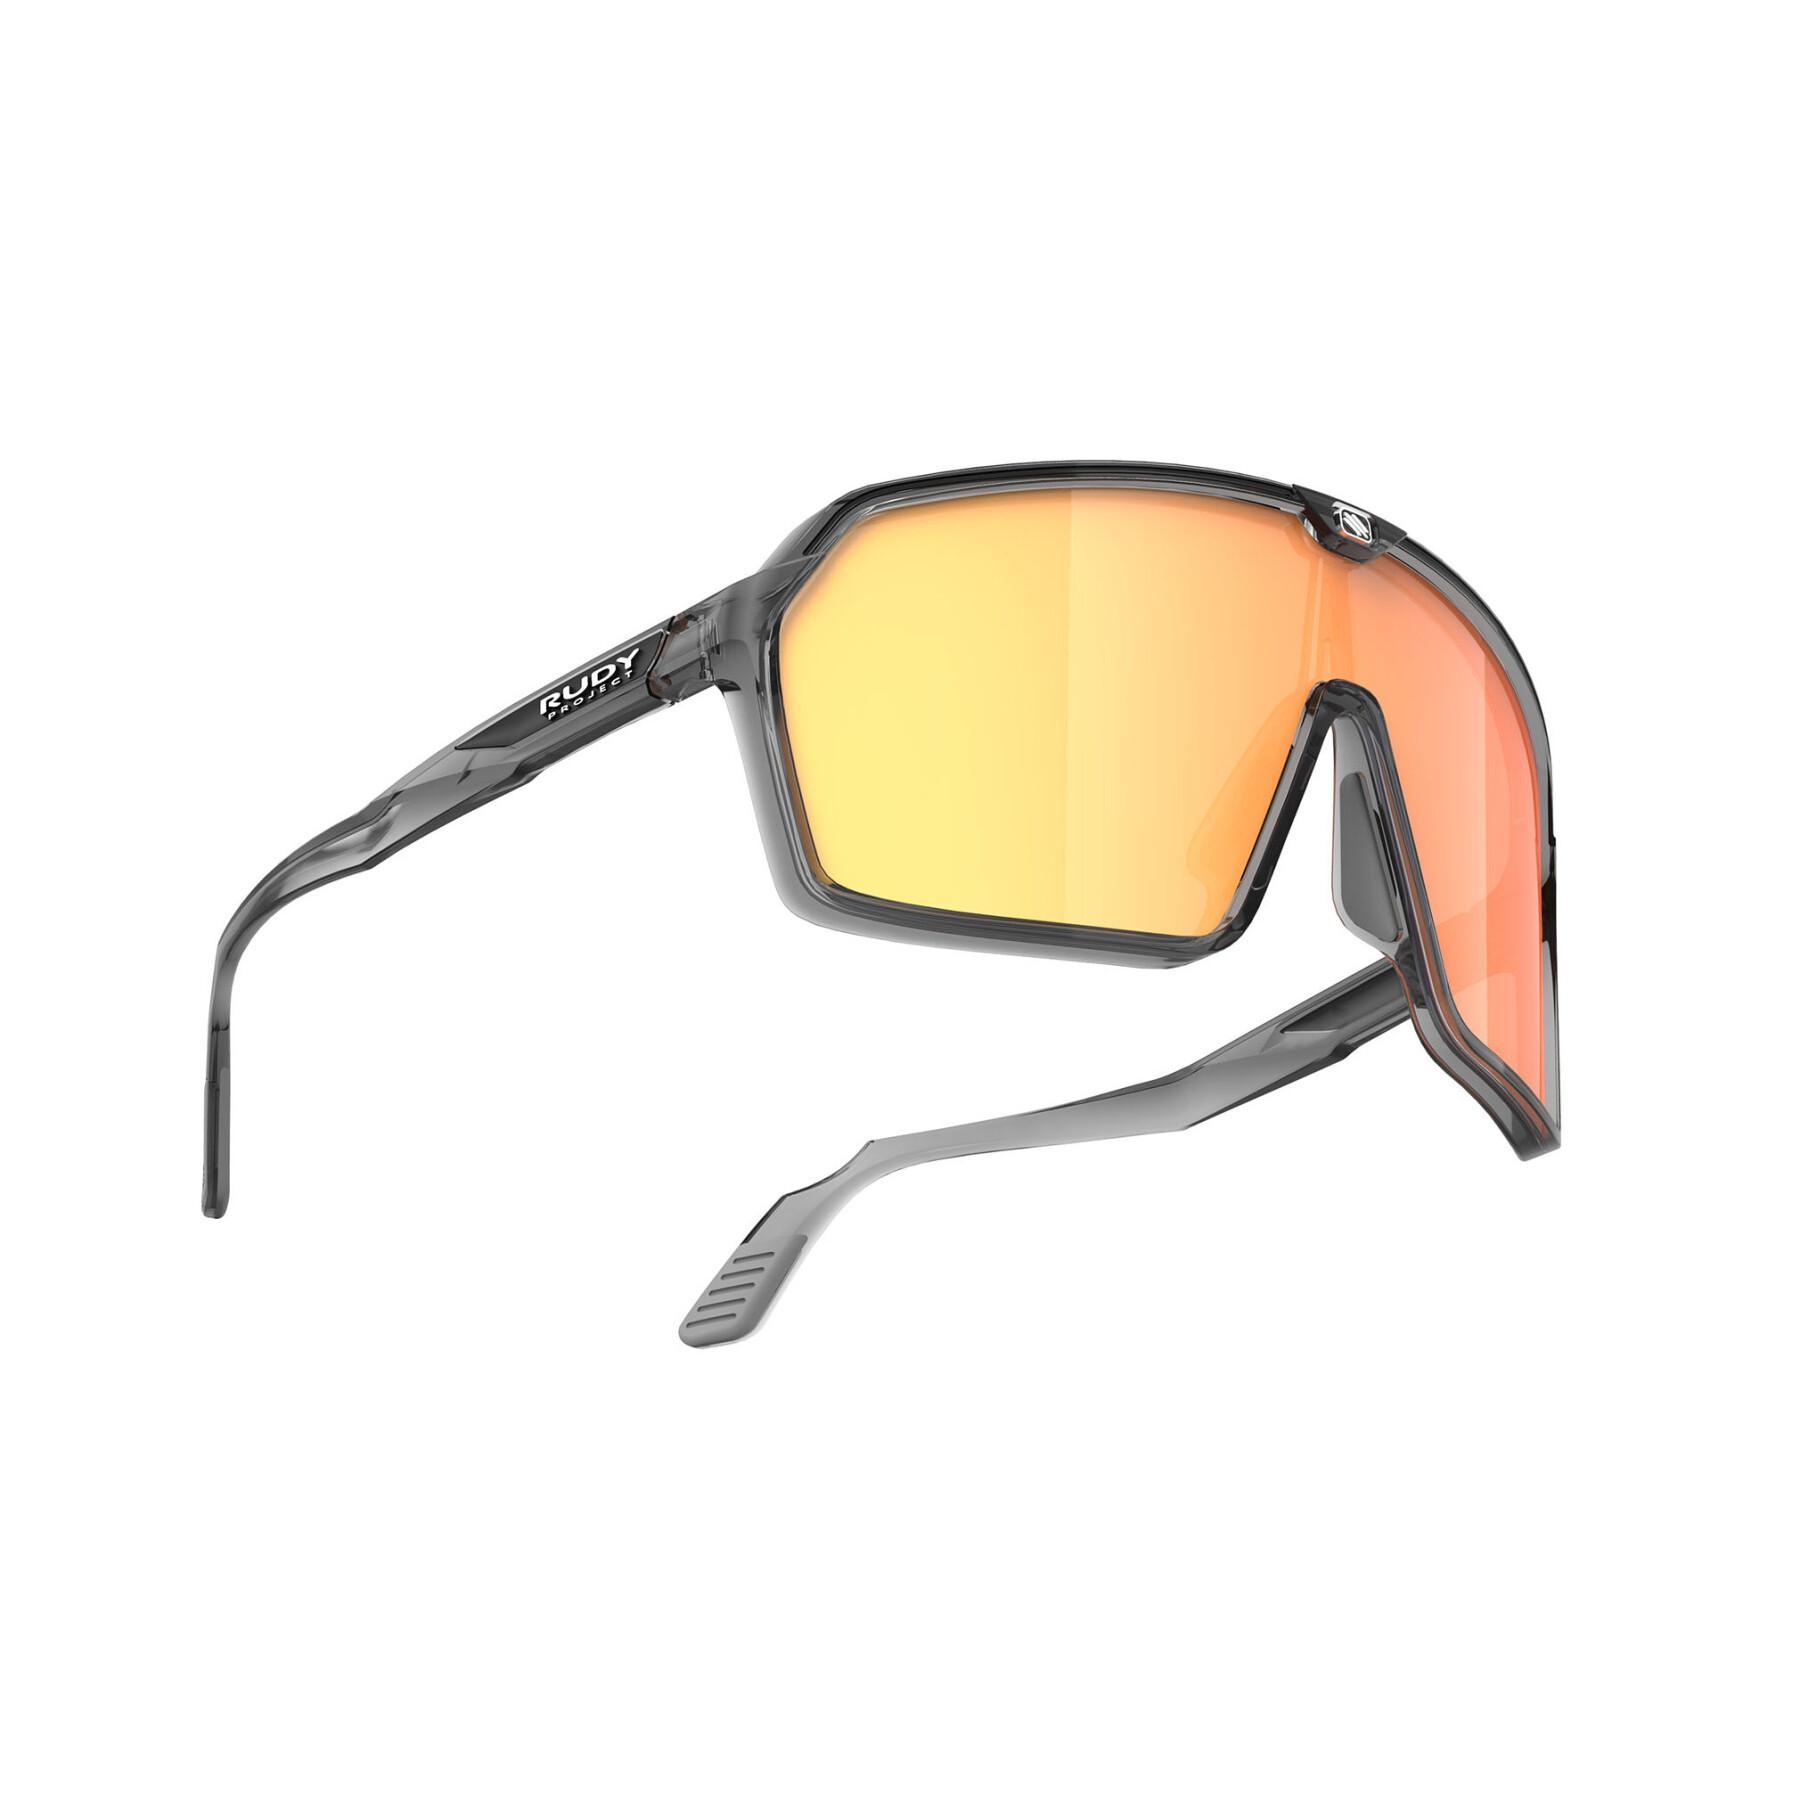 Sonnenbrille Rudy Project spinshield